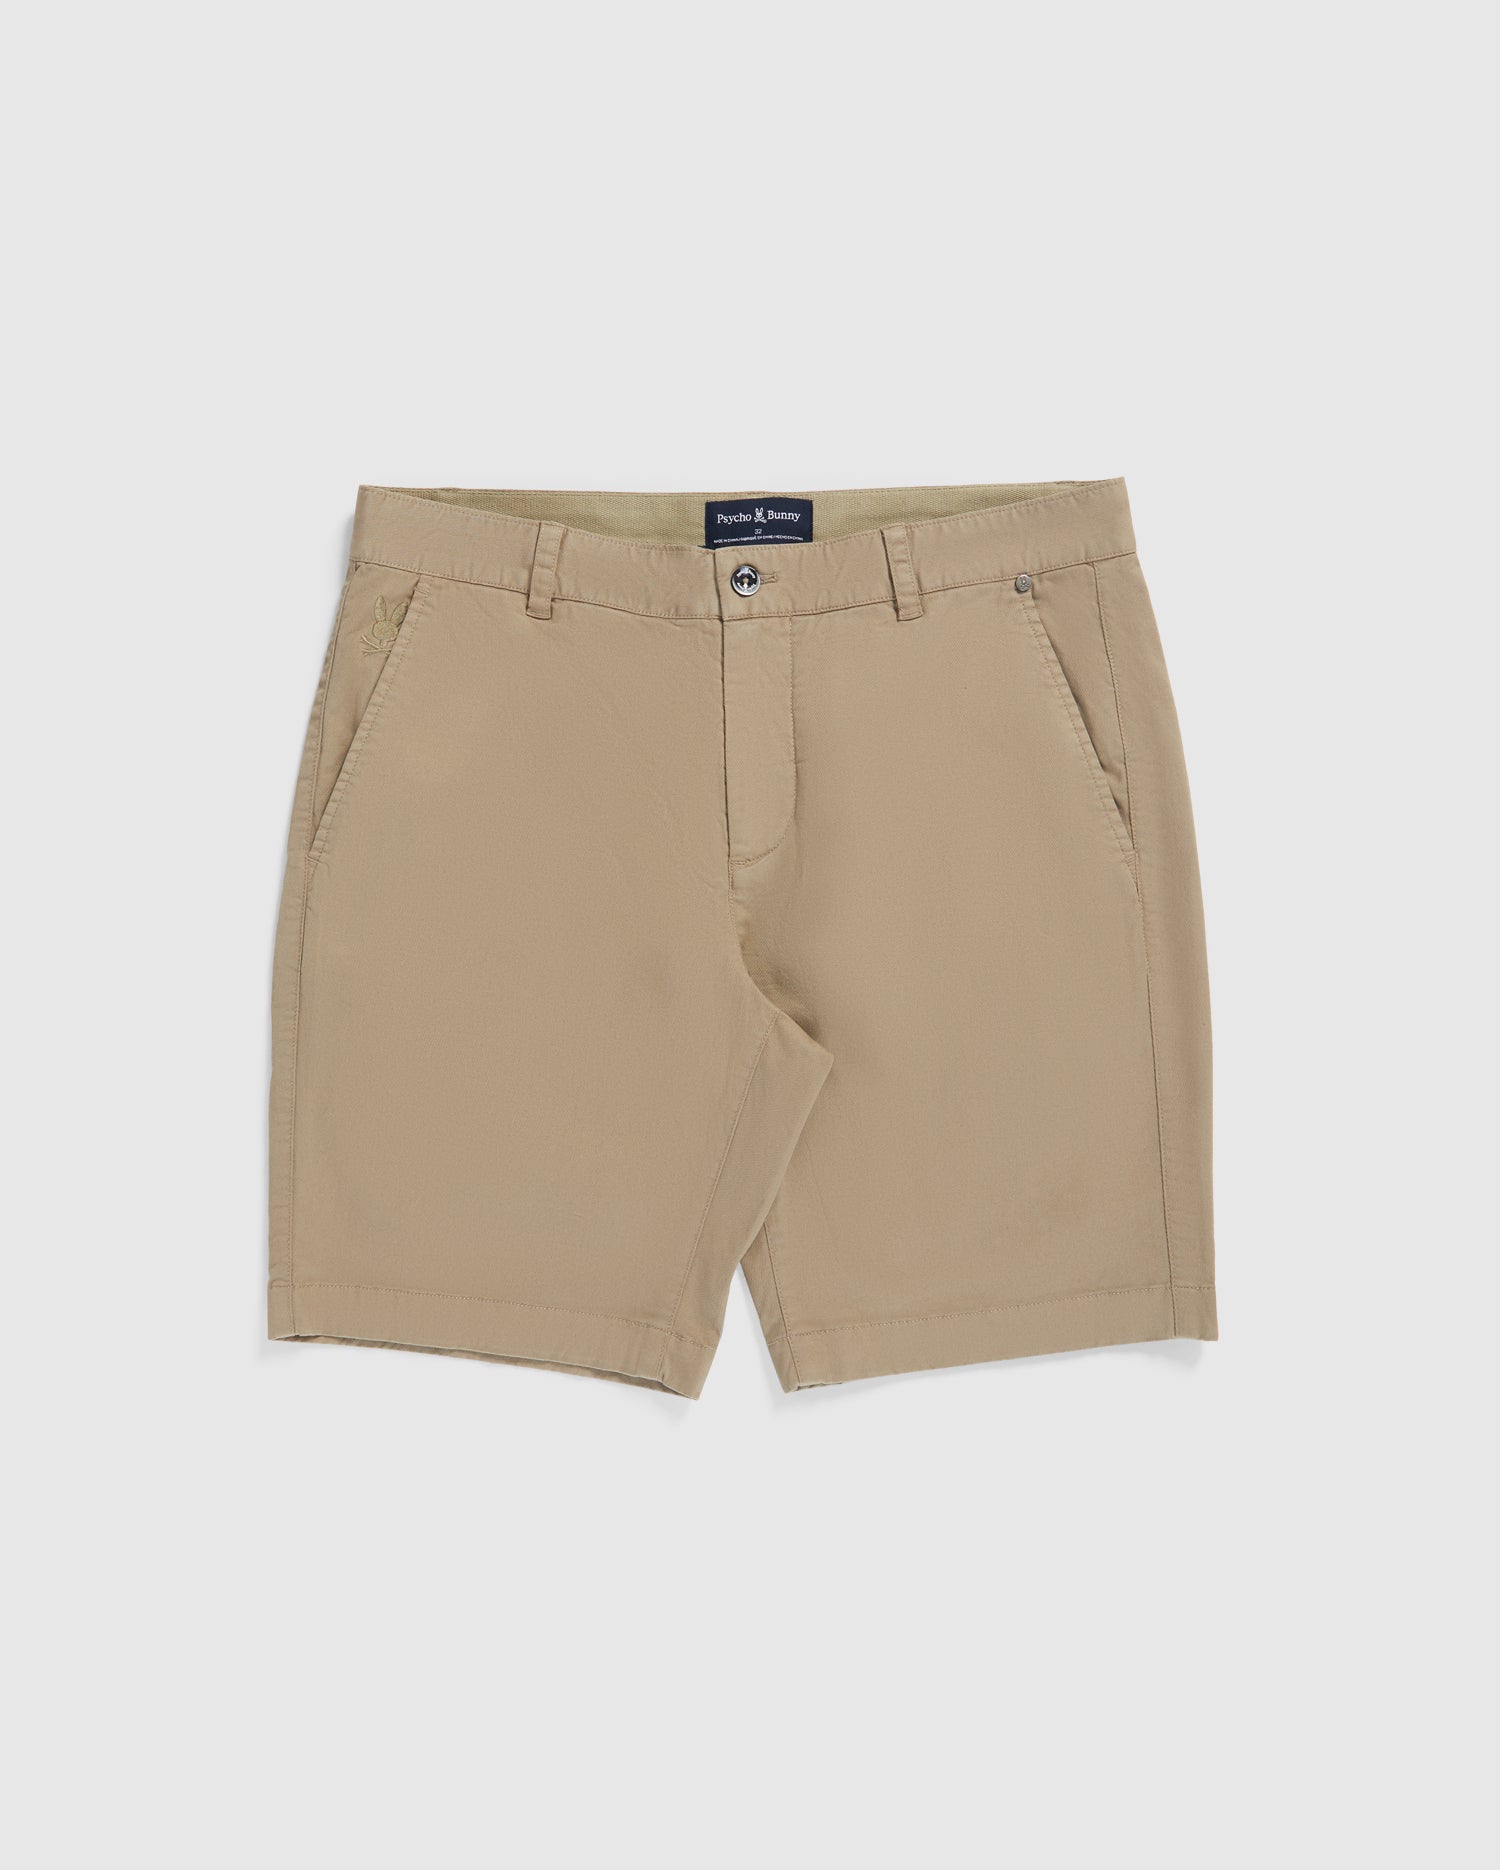 FRENCH TERRY BEIGE SHORTS - B6R829ARFT